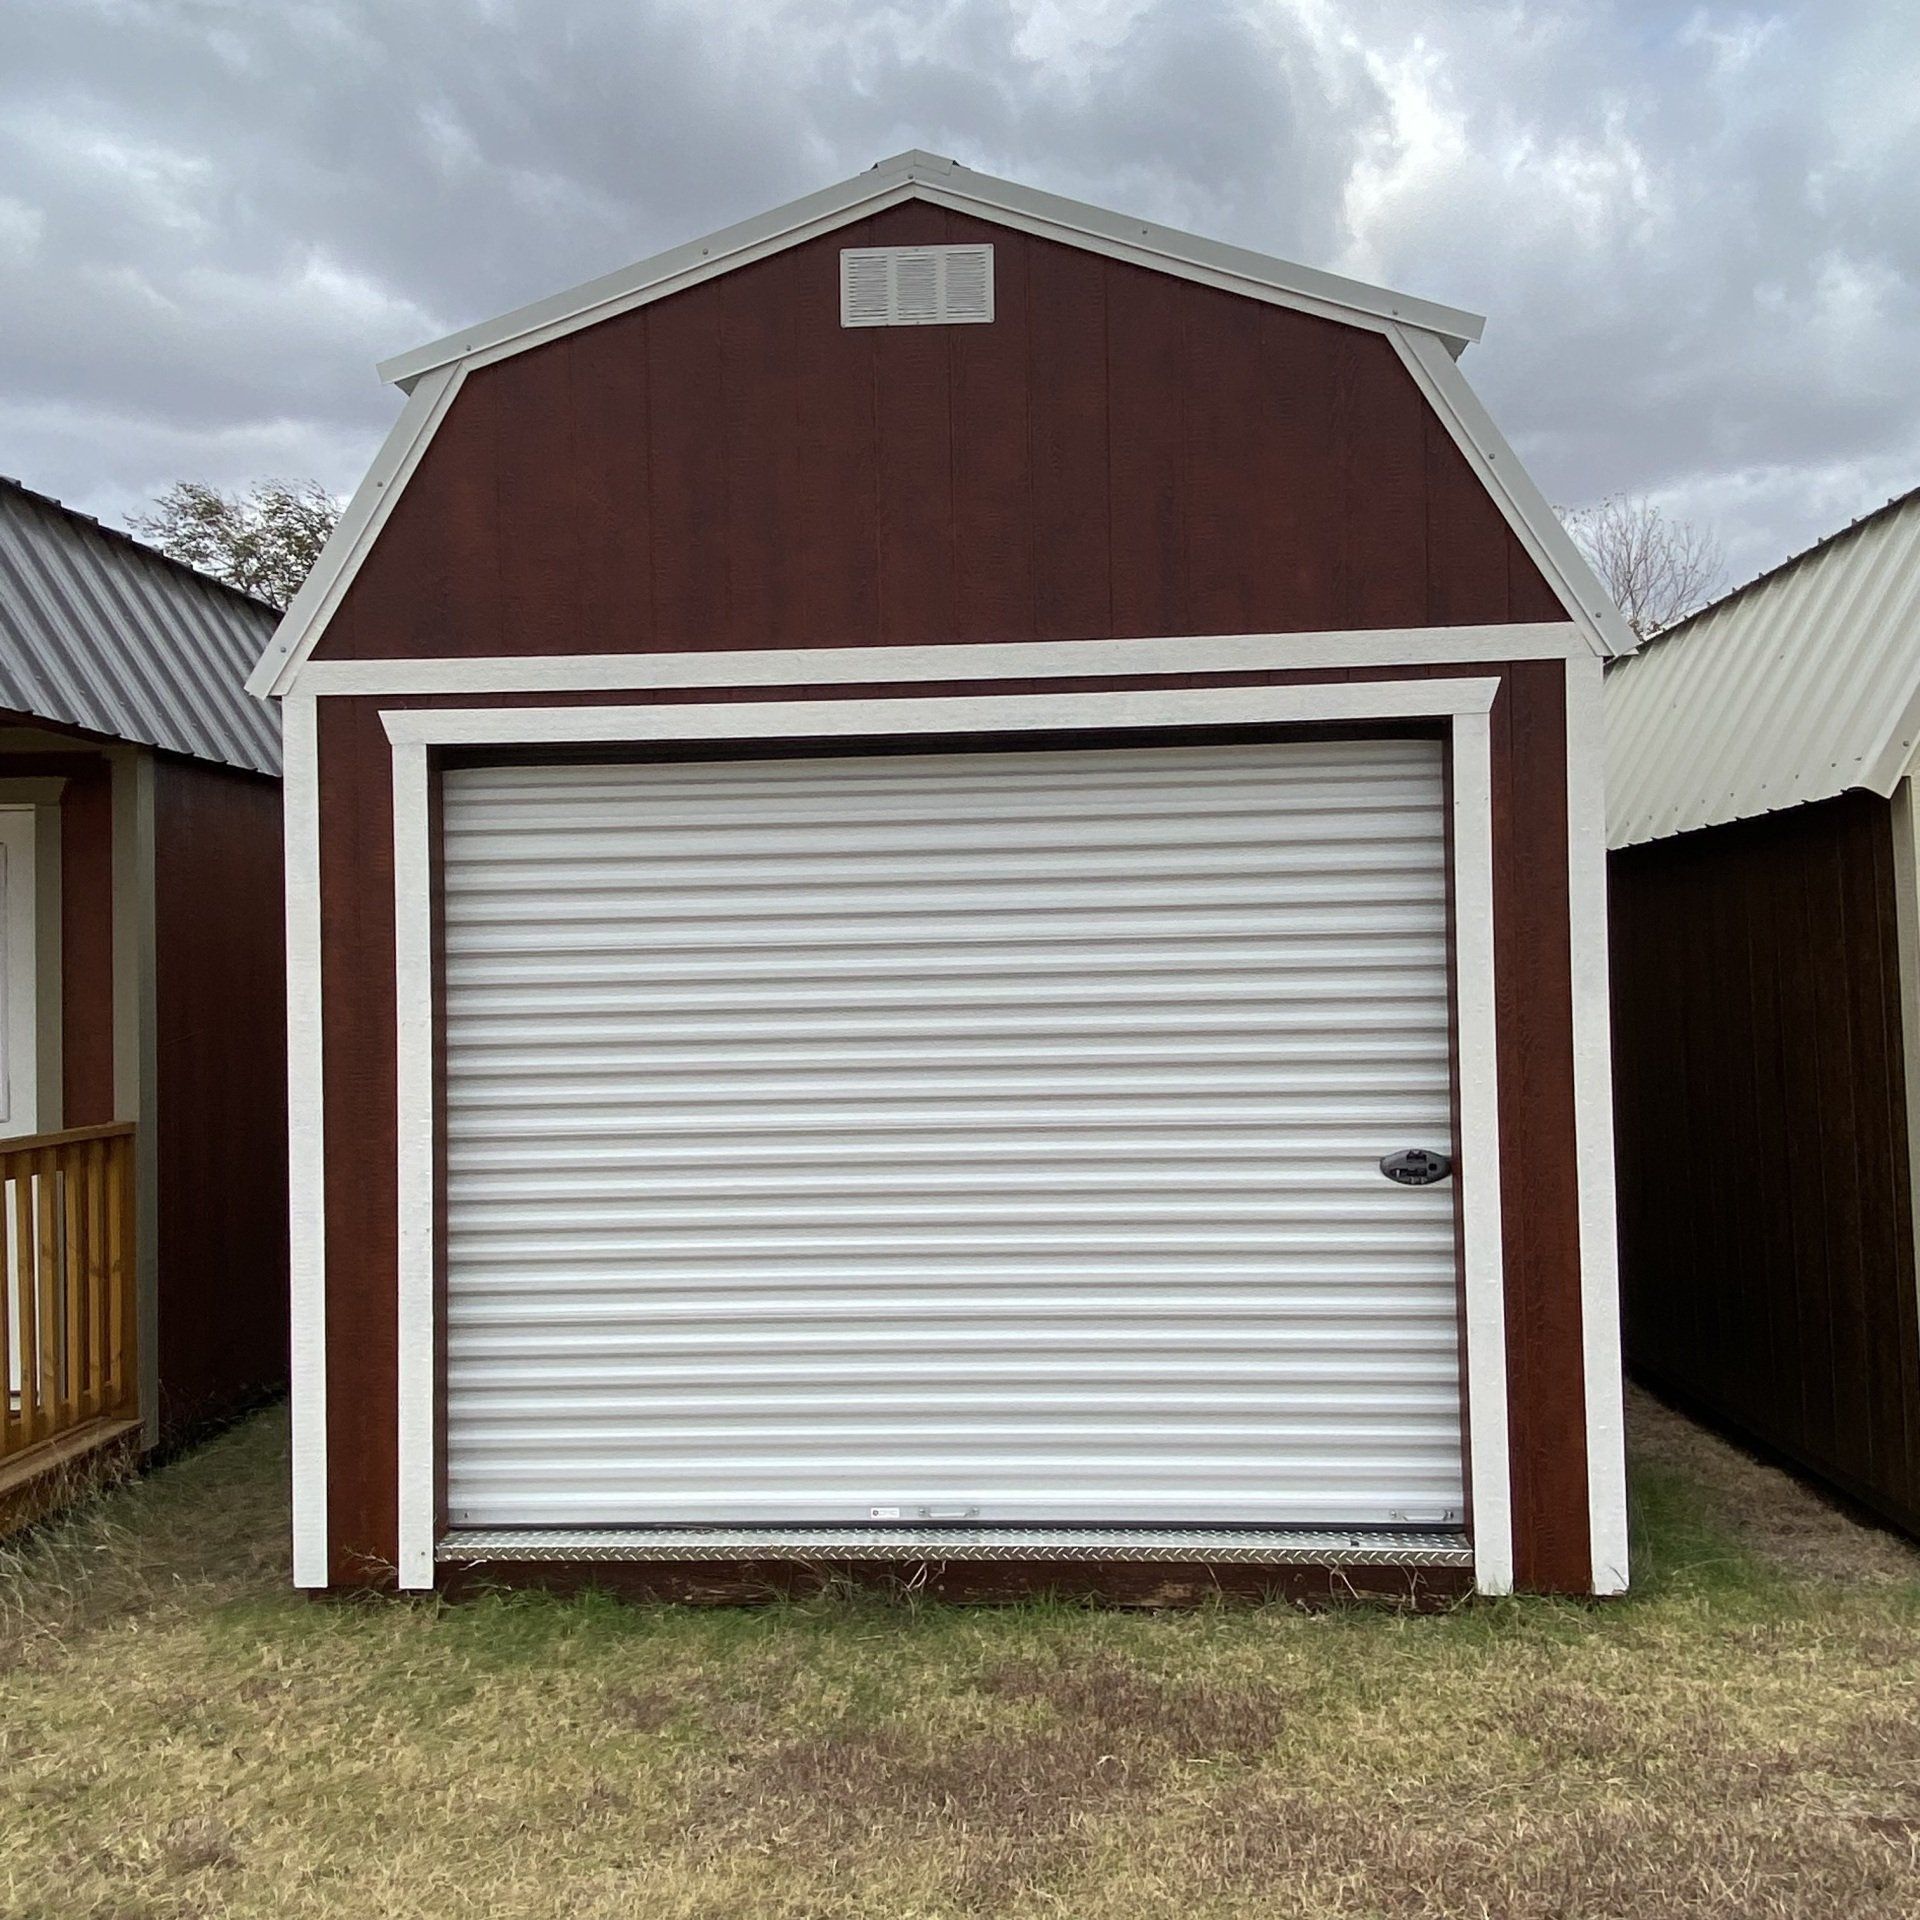 A brown side Lofted barn with a white garage door